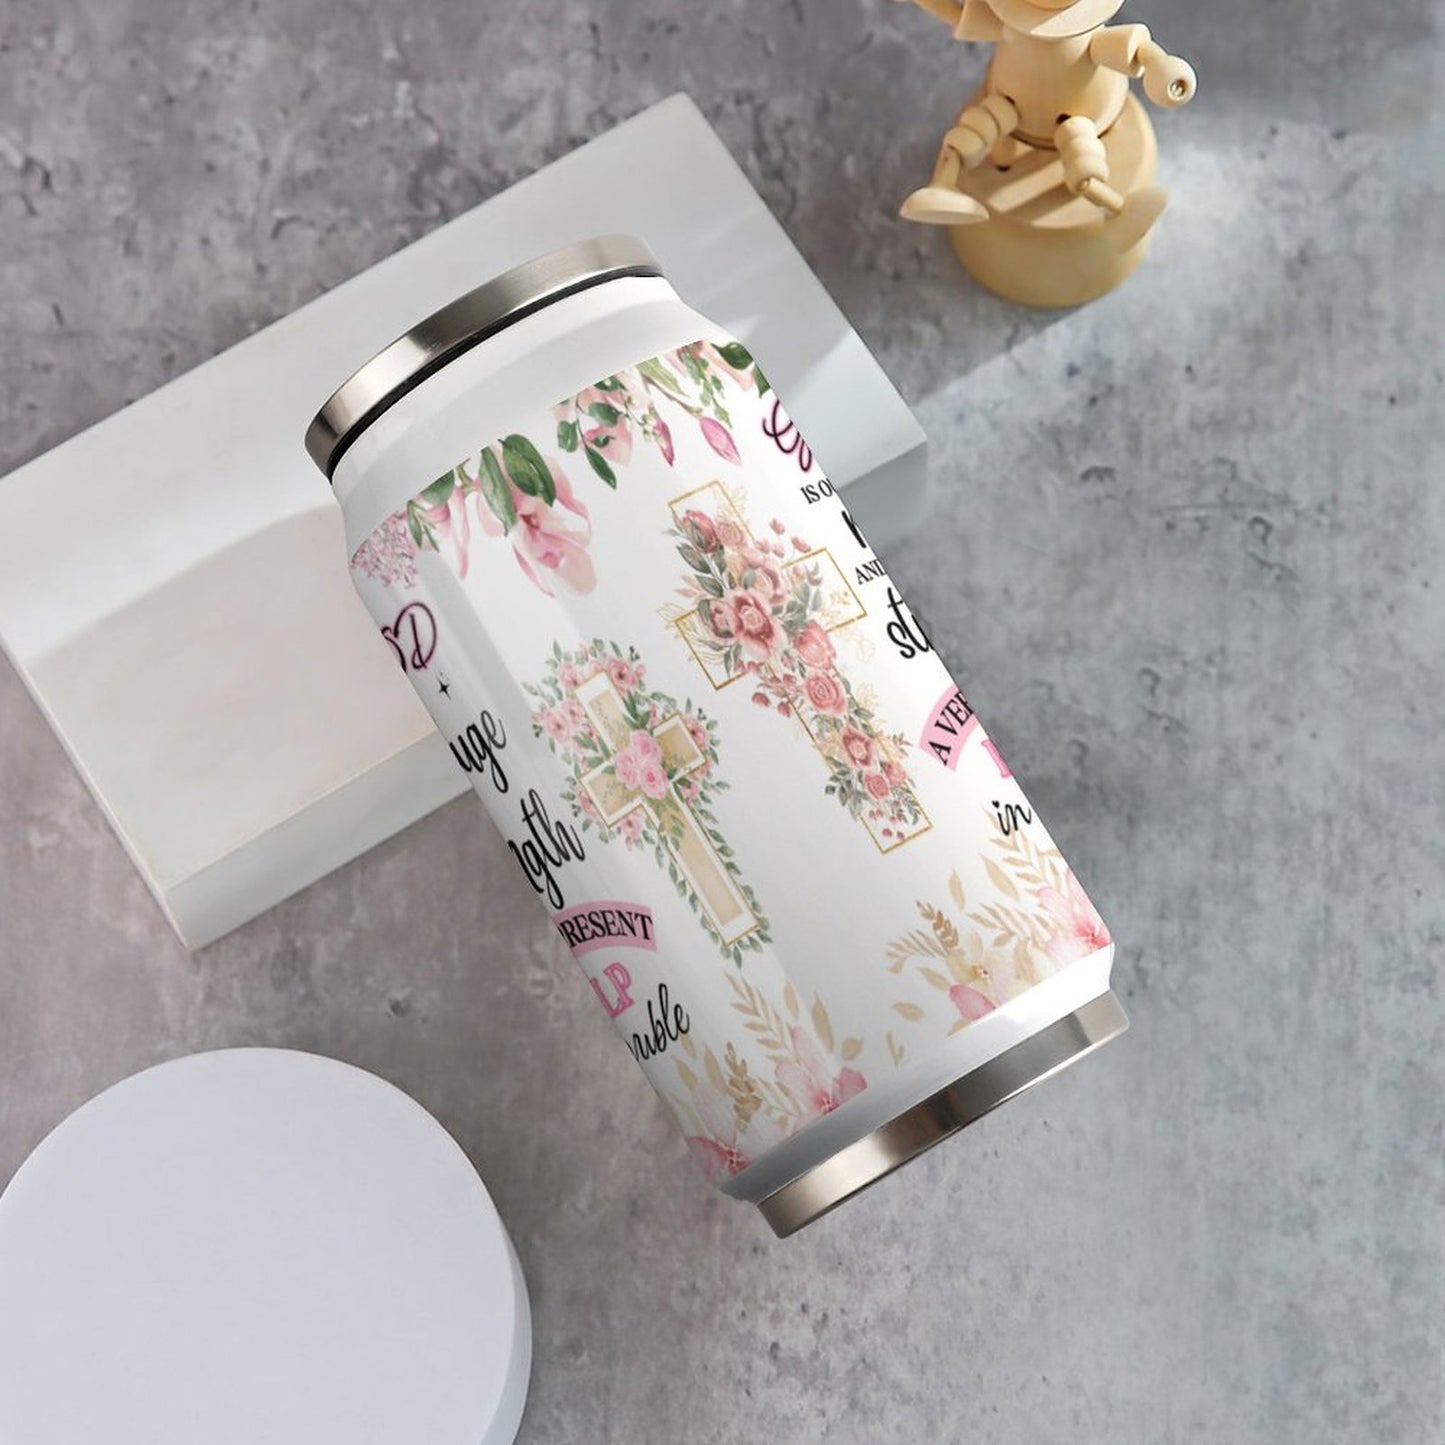 God Is My Refuge And Strength A Very Present Help In Trouble Christian Stainless Steel Tumbler with Straw SALE-Personal Design